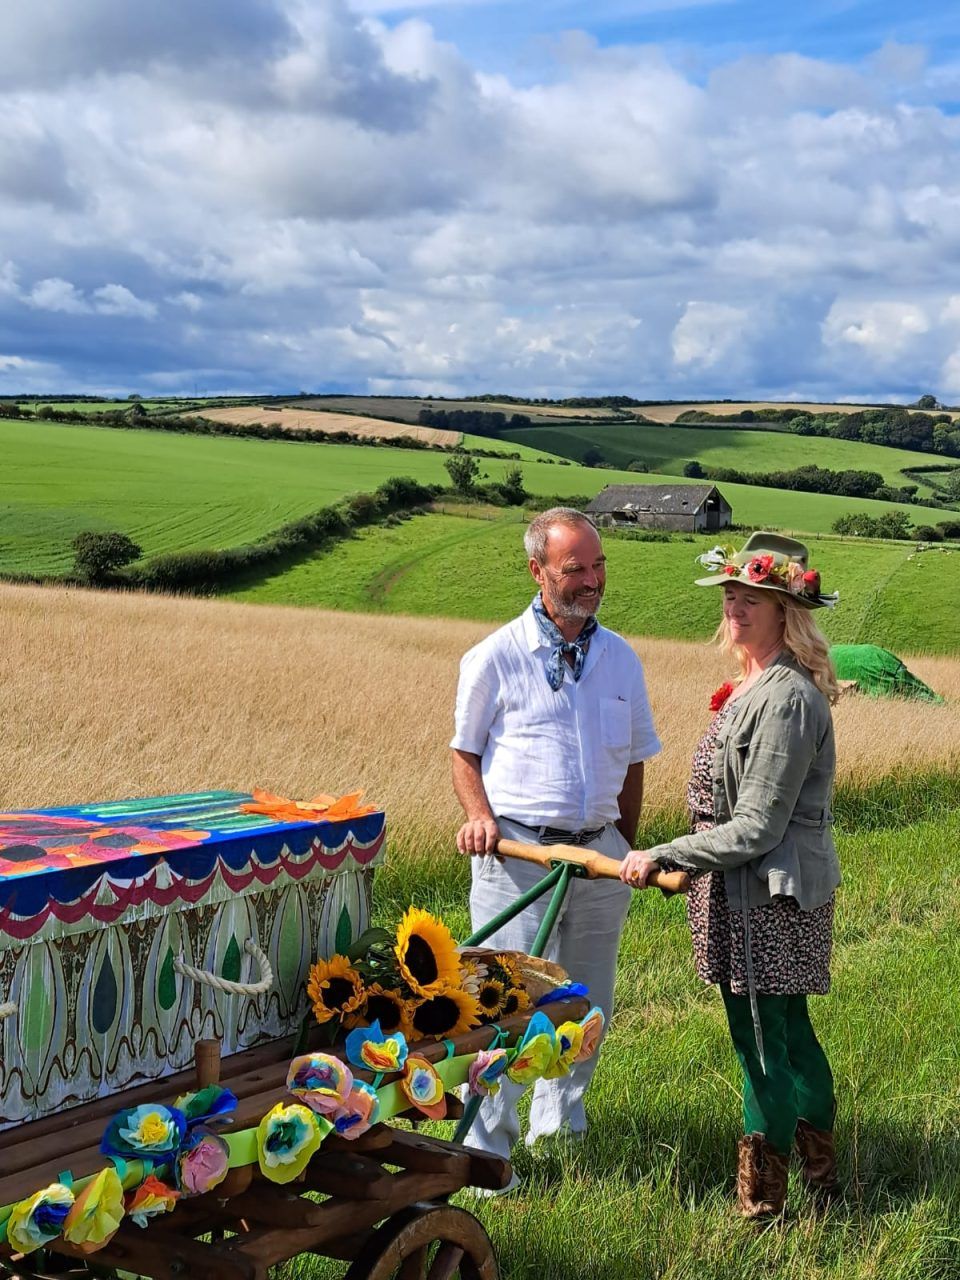 Celebration of life at Dorst Downs natural burial ground with a colourfully painted cardboard coffin on the wooden bier, with the rolling hills of Dorset downland behind.